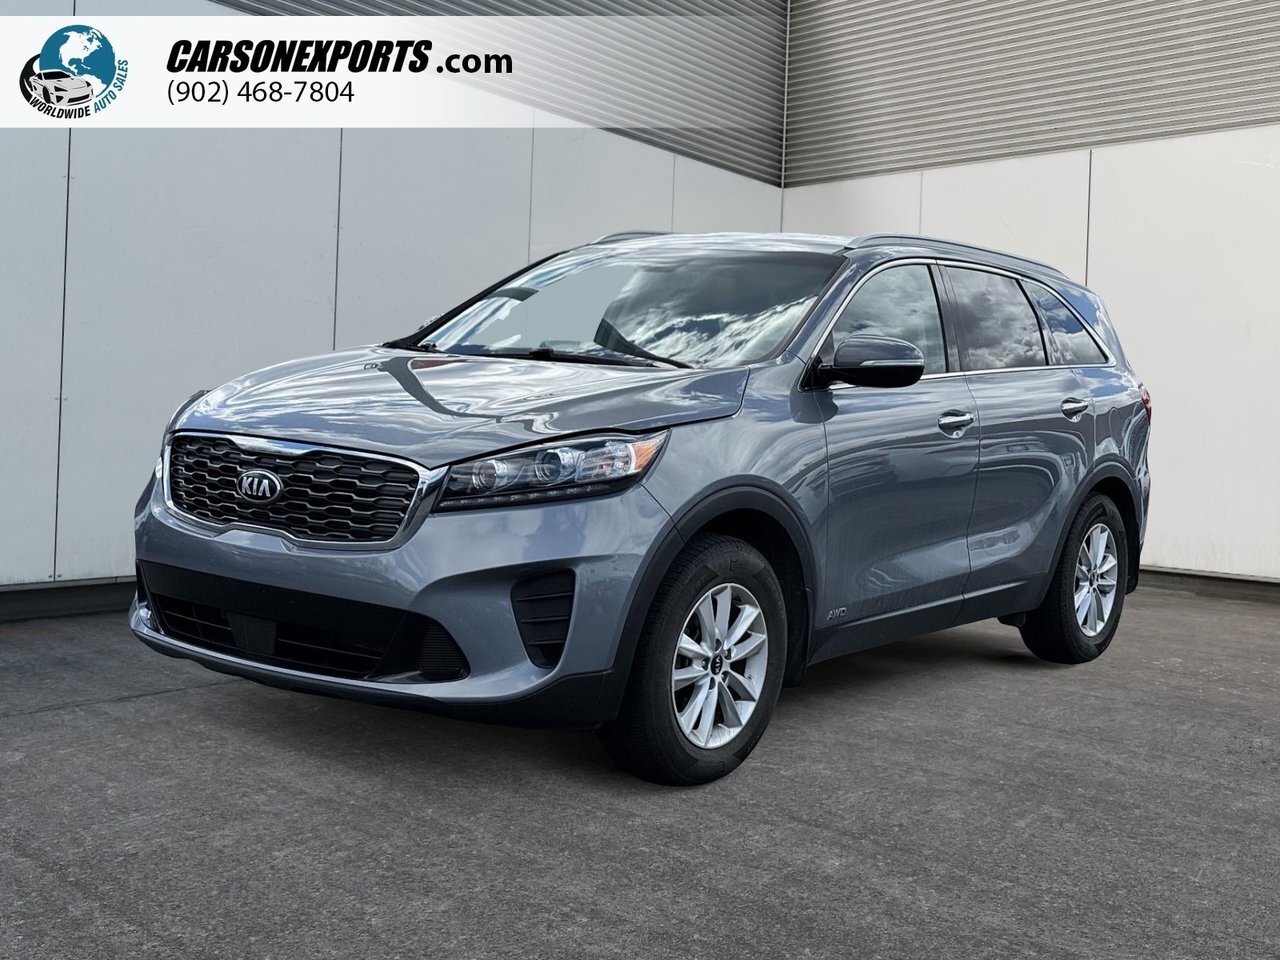 2020 Kia Sorento LX The best place to buy a used car. Period.